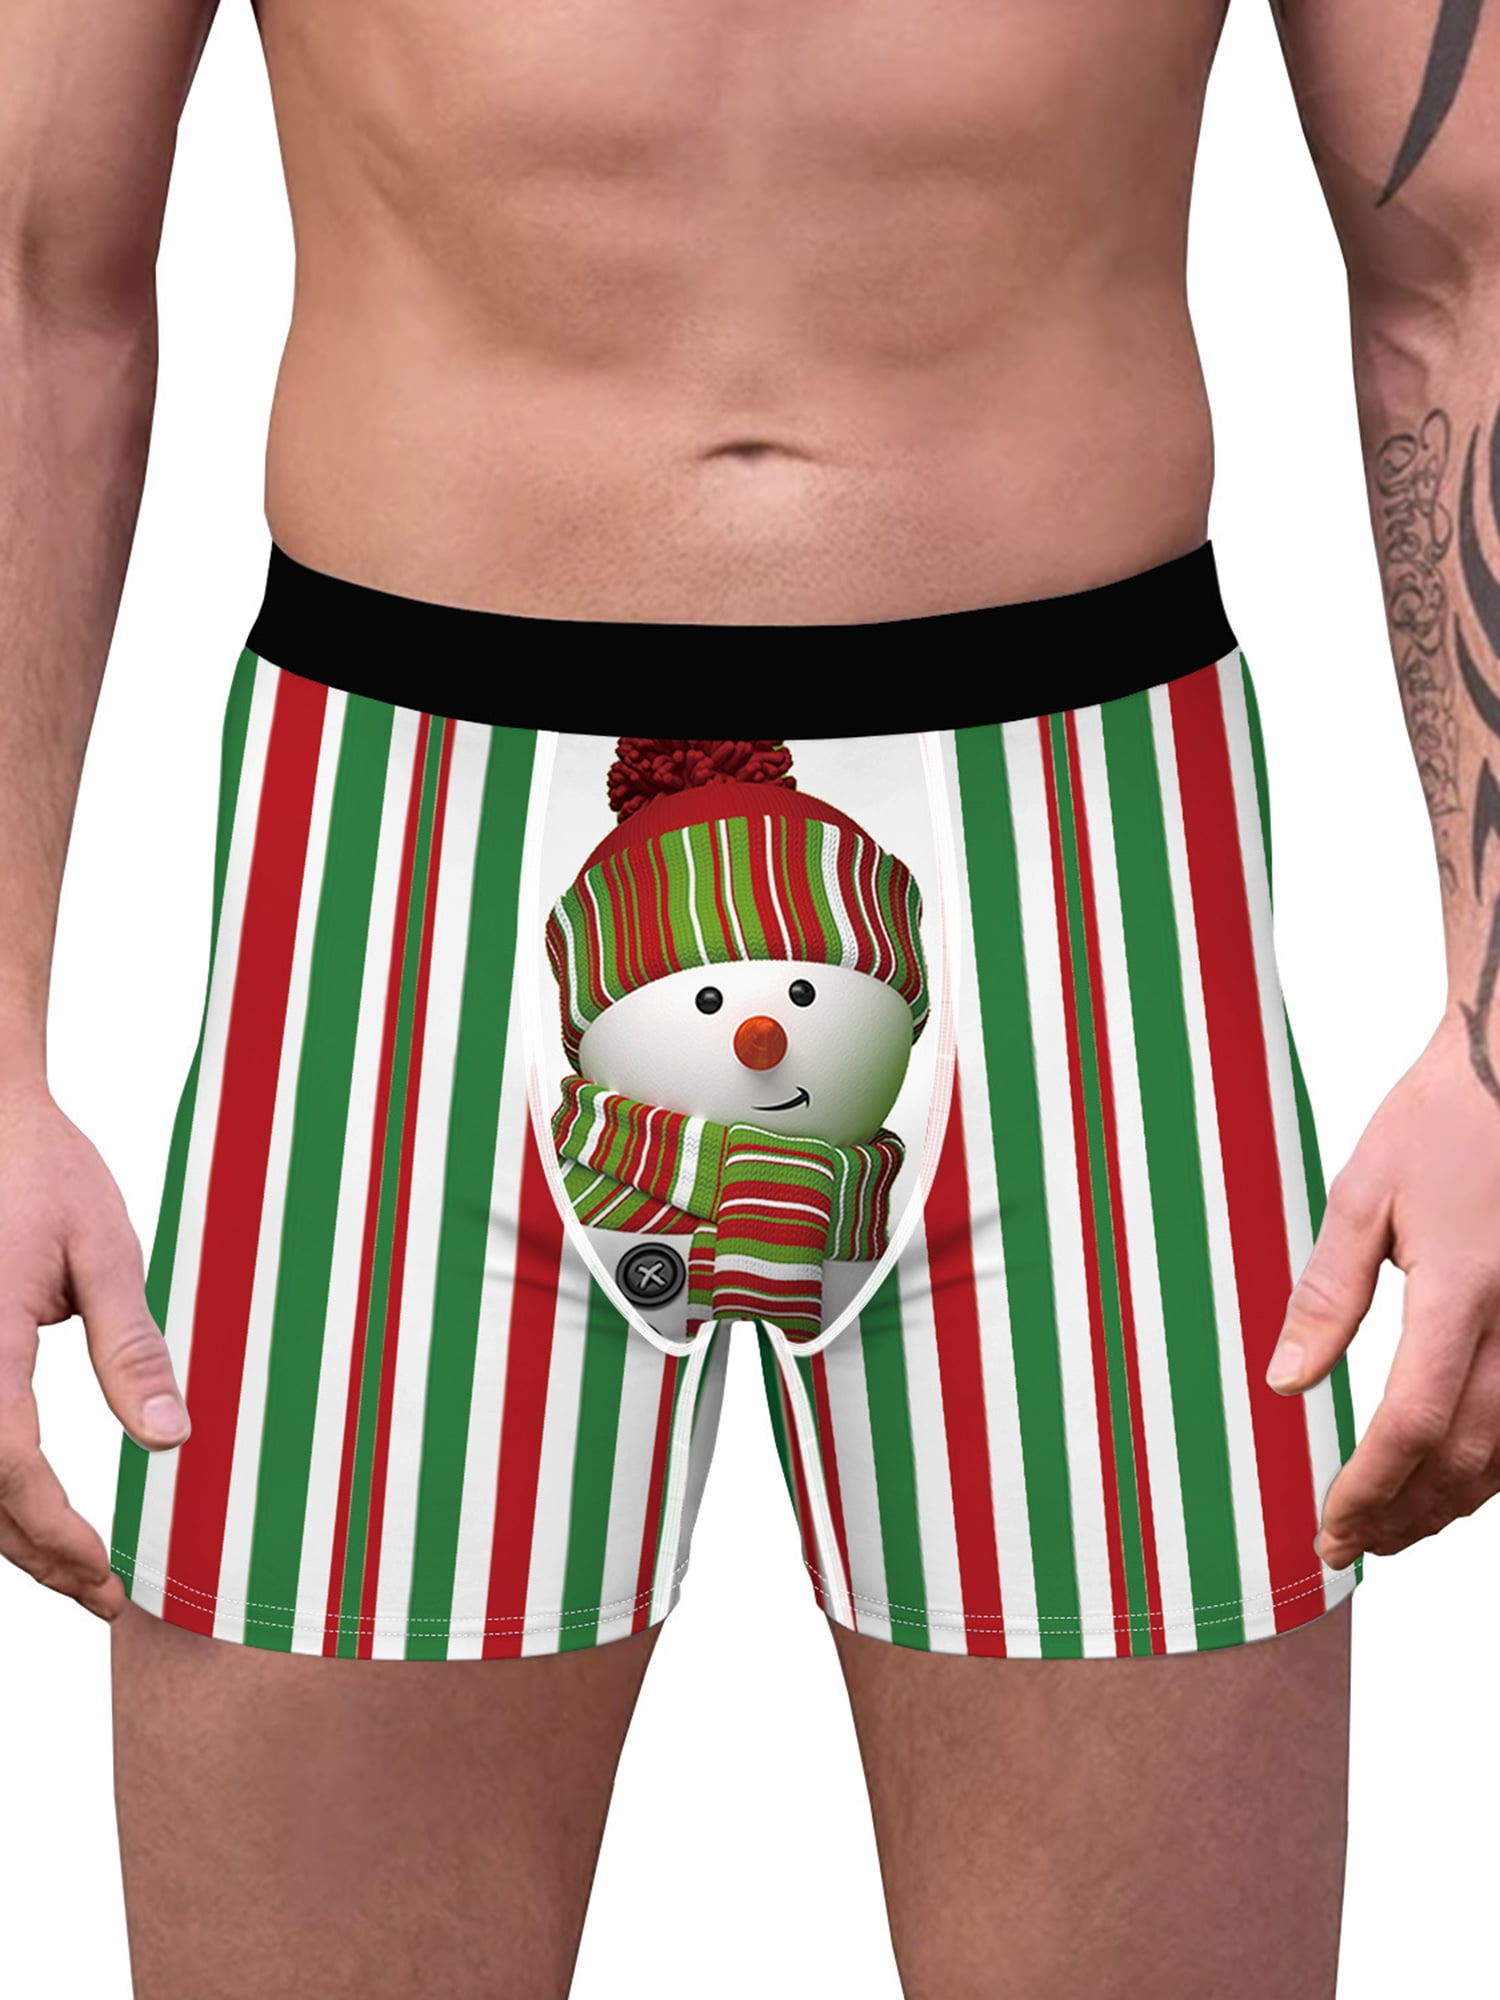 Large Package Boxers Mens Underwear Christmas Gift Funny Naughty Slutty  Booty Shorts Bachelorette Party